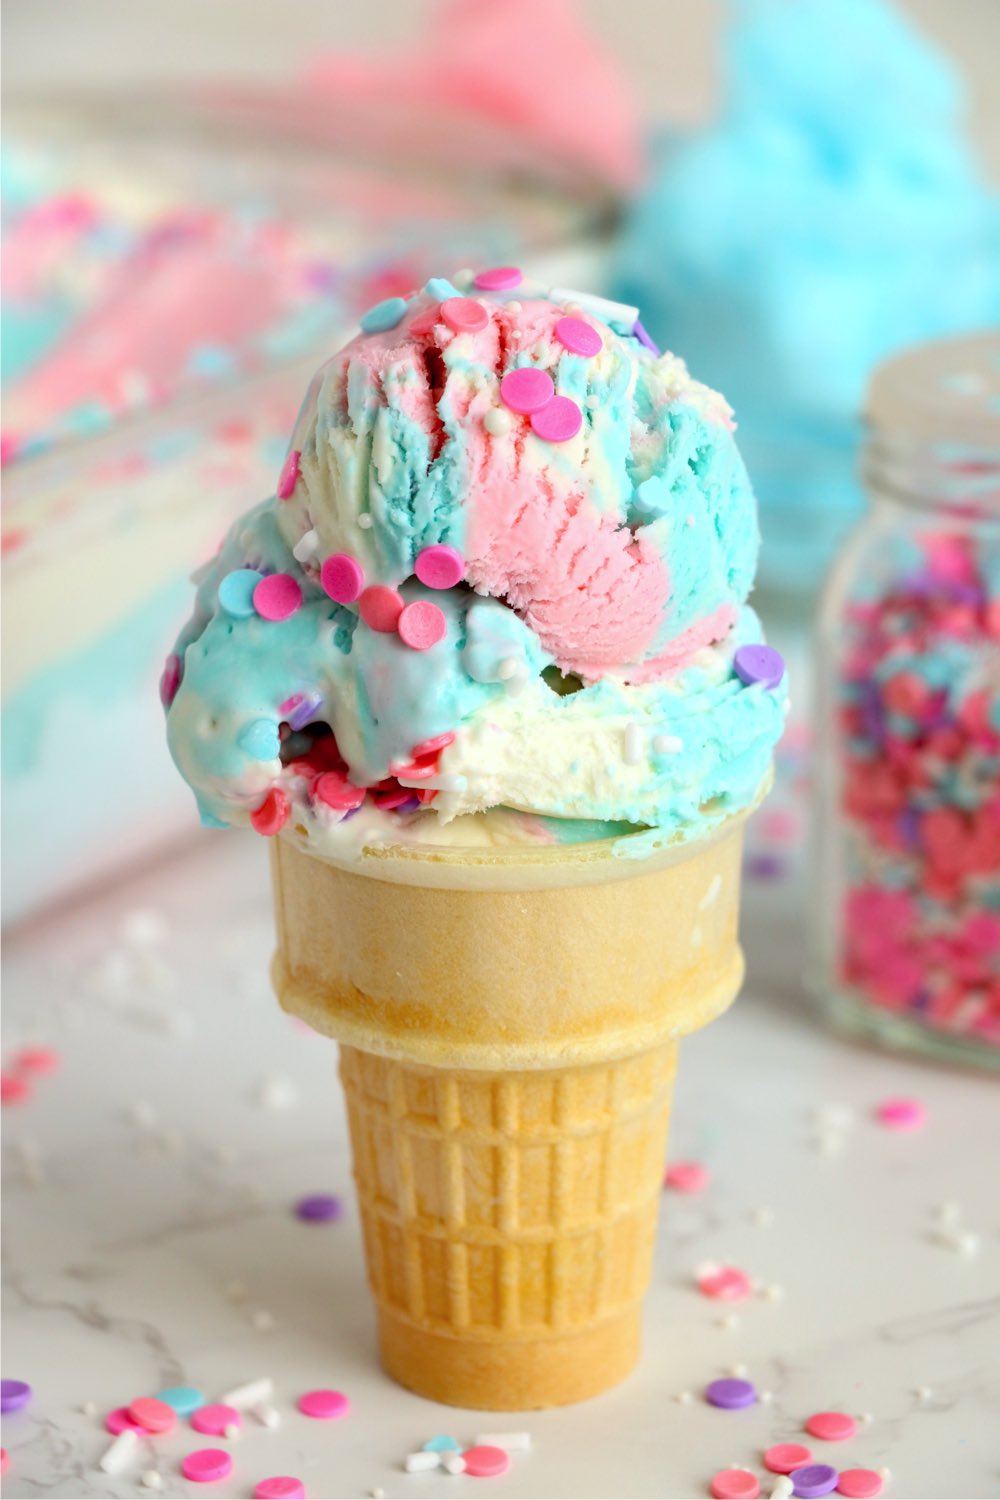 ice cream cone with colorful ice cream and sprinkles